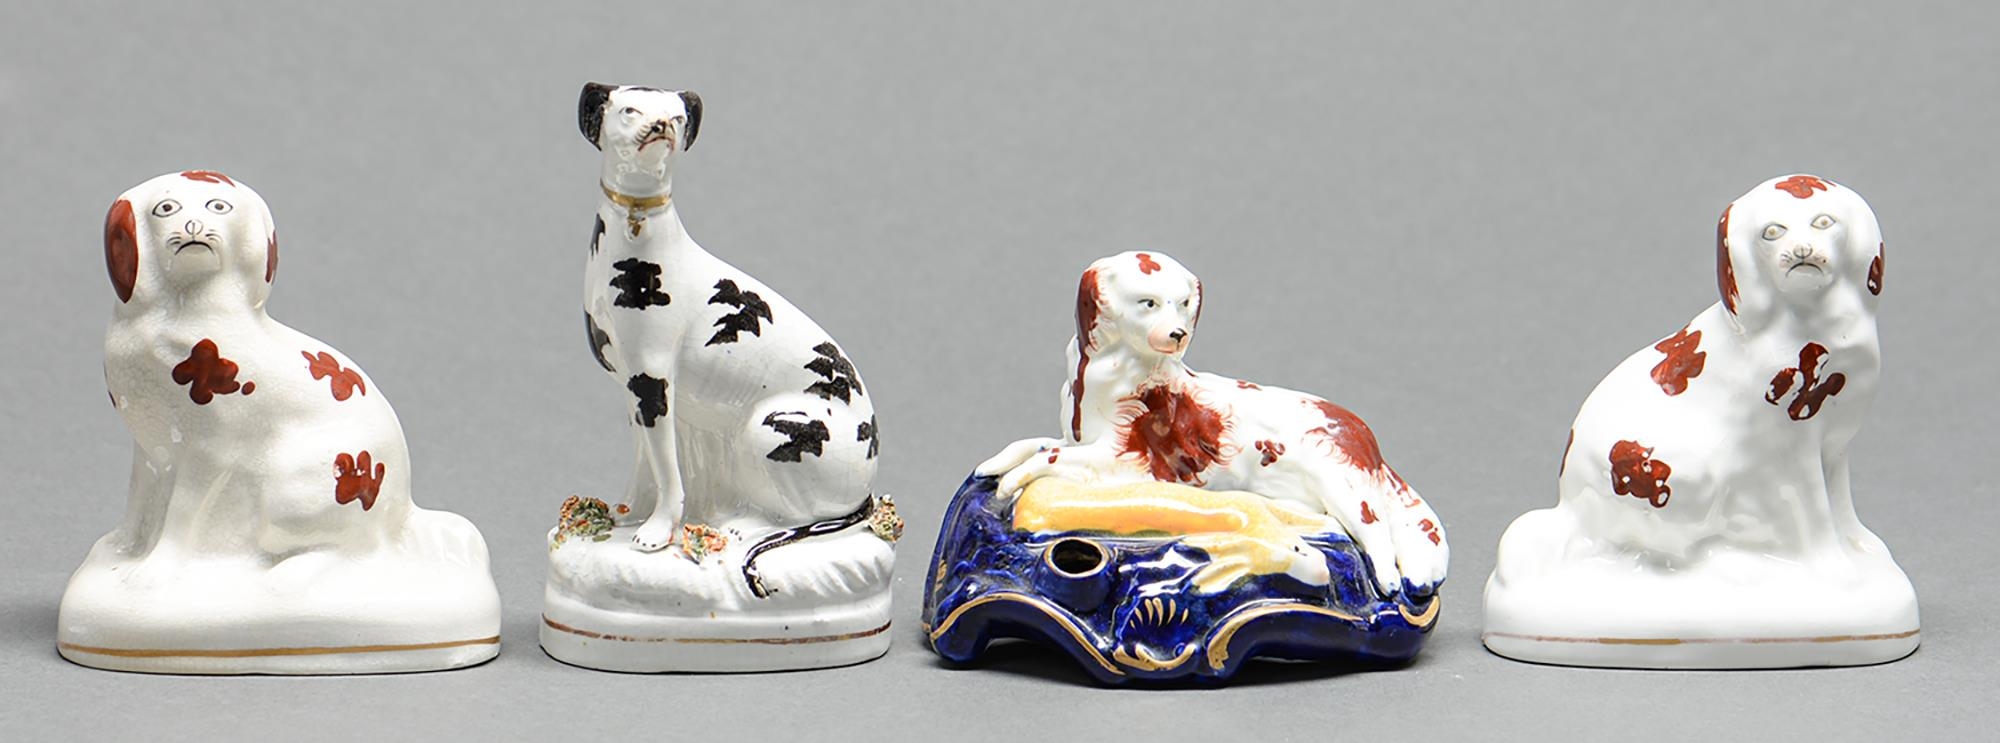 Four Staffordshire earthenware models of dogs, mid 19th c, including a quill holder in the form of a